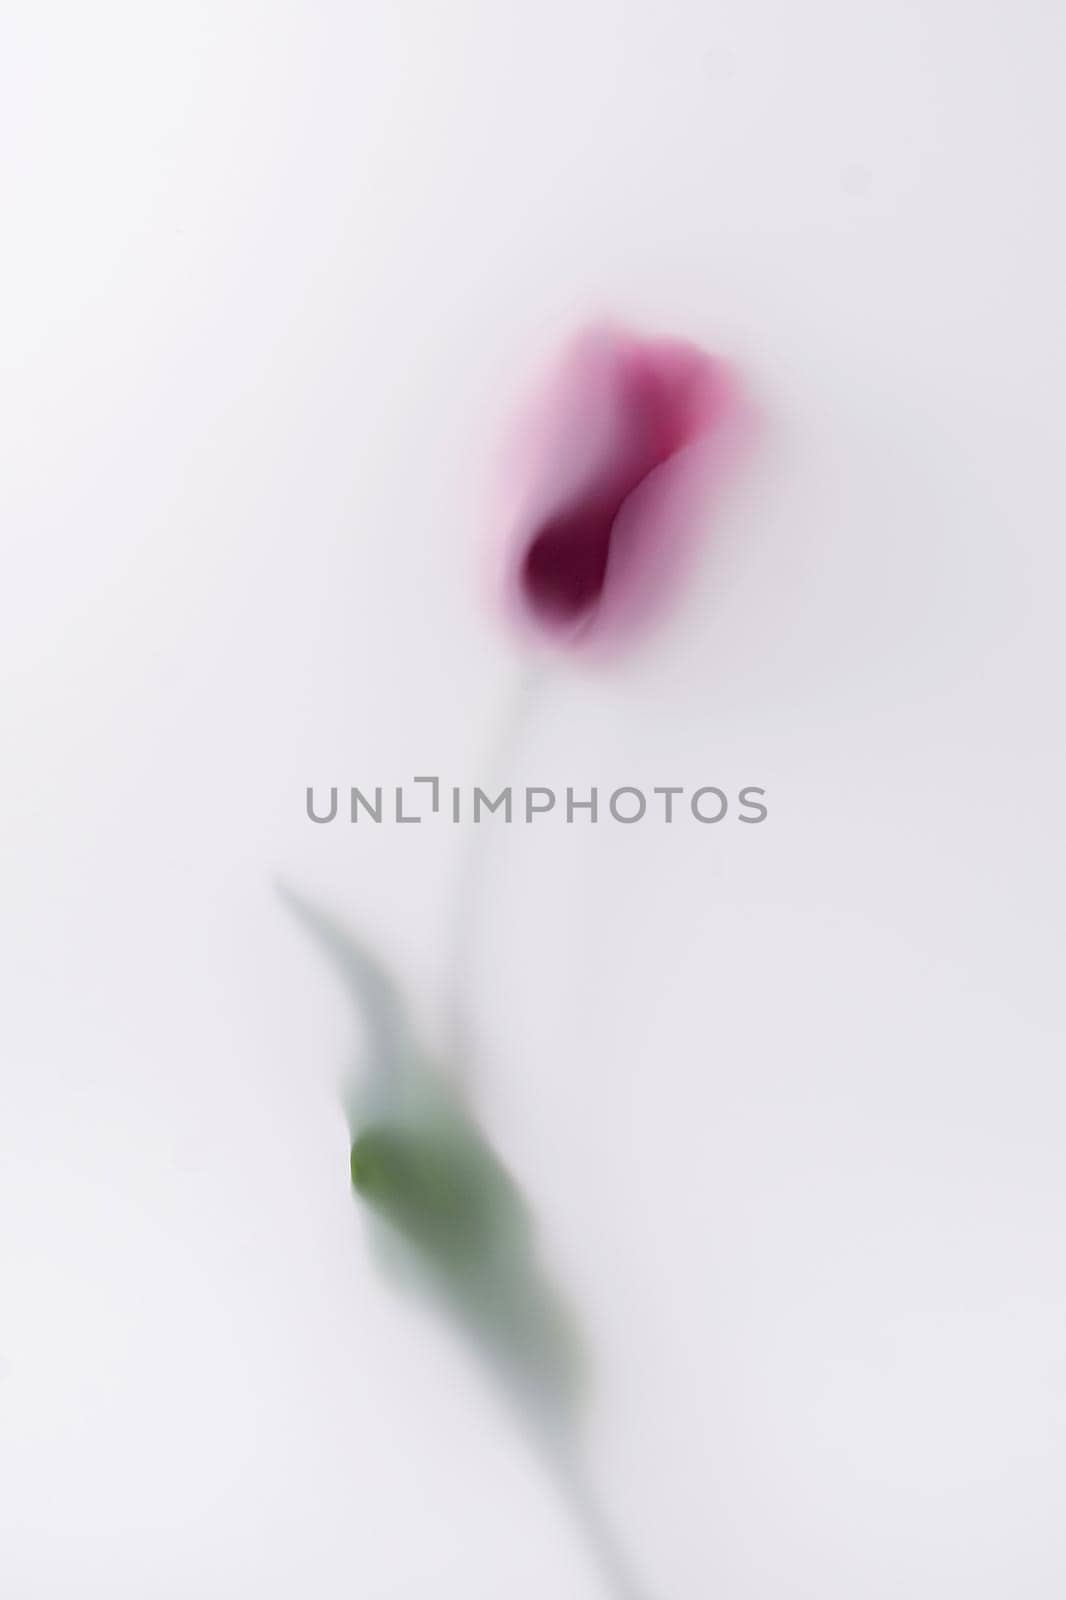 One blurred in magic romantic mist red bloom flower. For a wedding or other celebration.